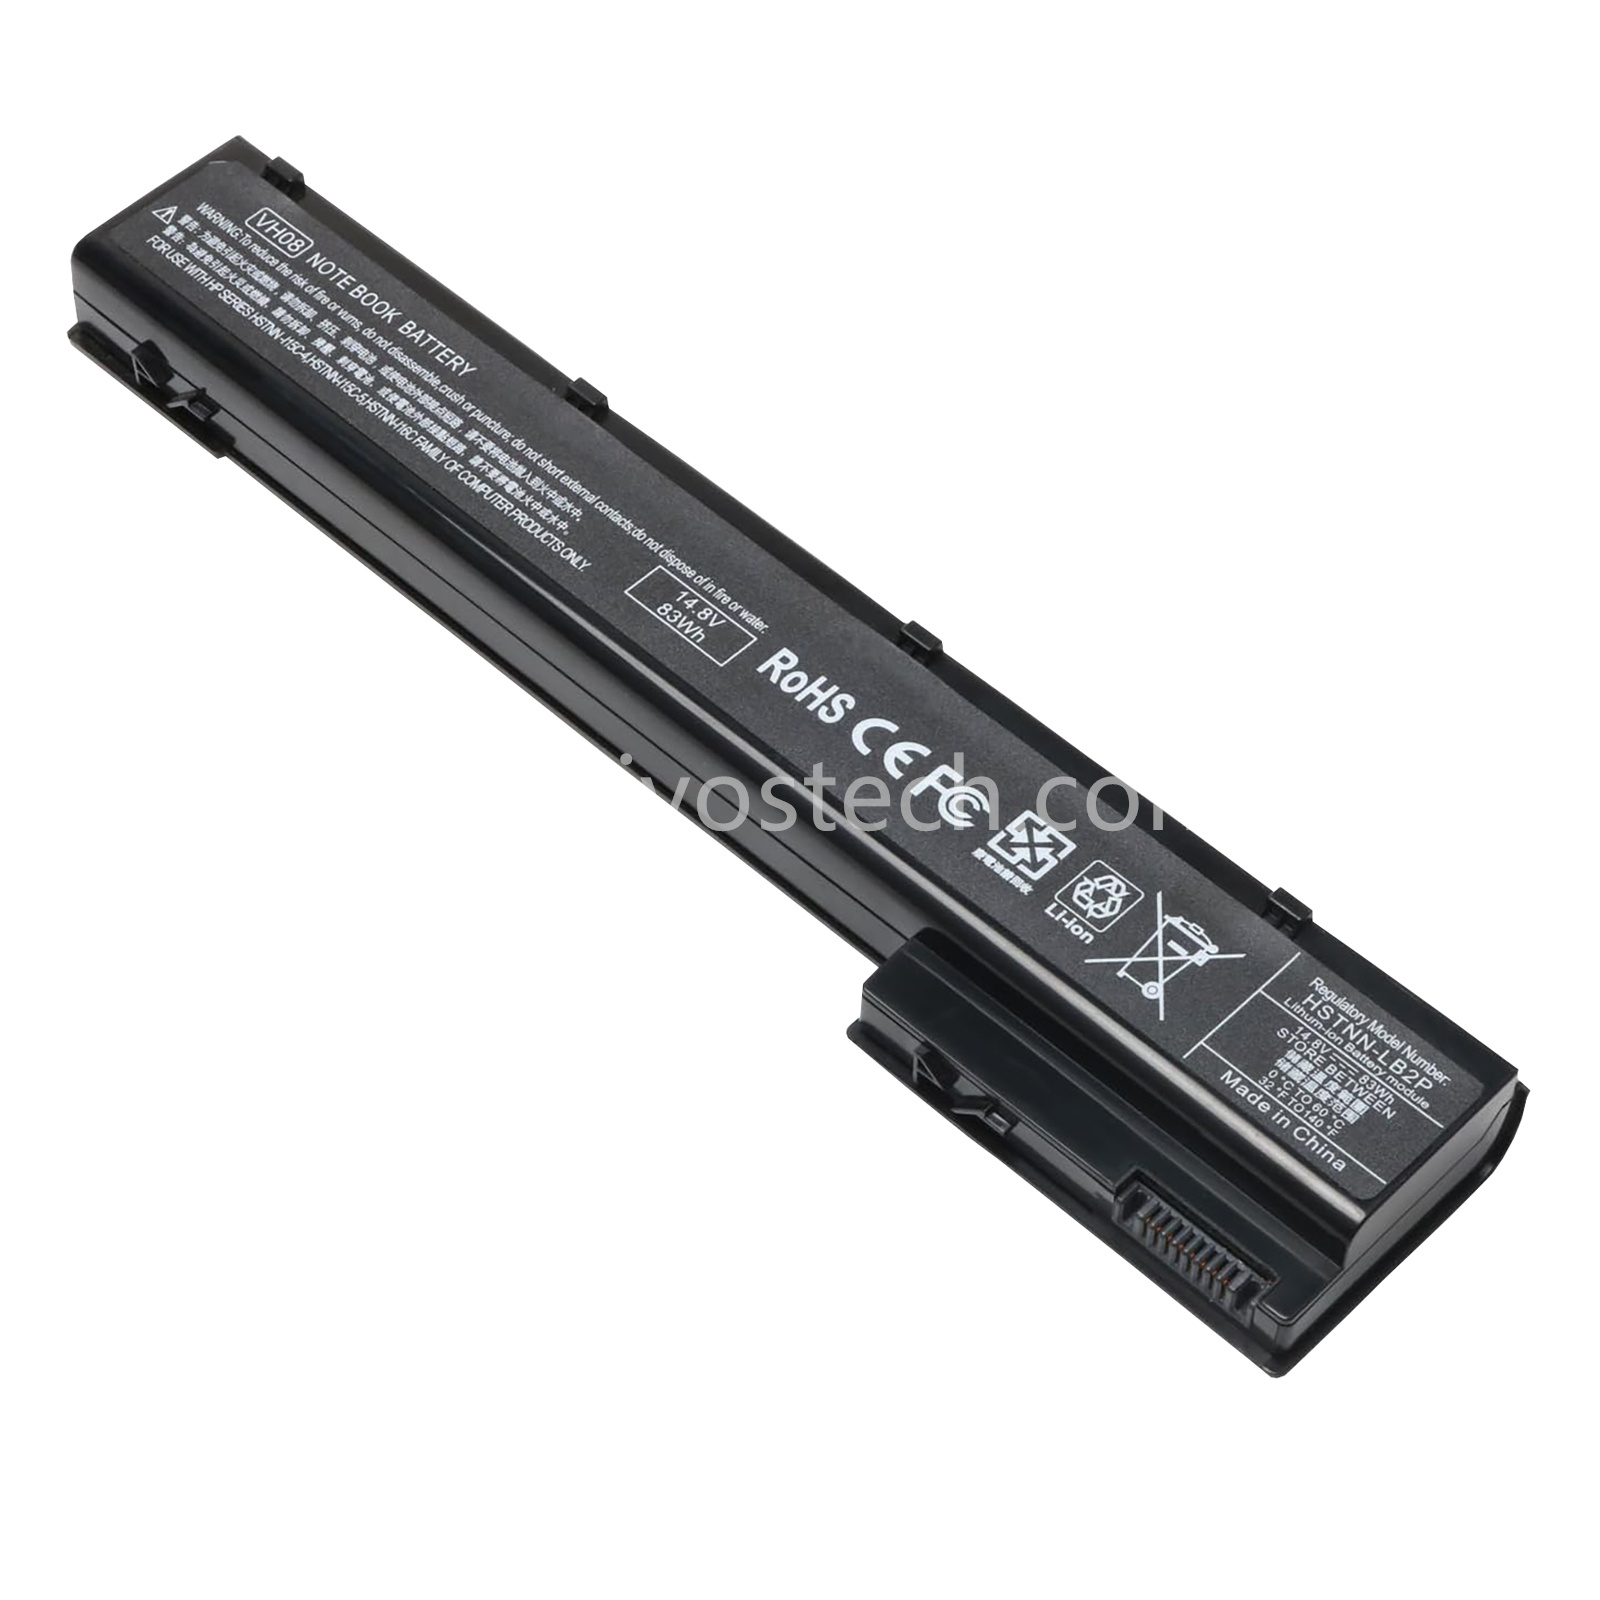 VH08 83Wh 14.8V Replacement Laptop Battery for HP EliteBook 8560w 8570w 8760w 8770w Mobile Workstation Series